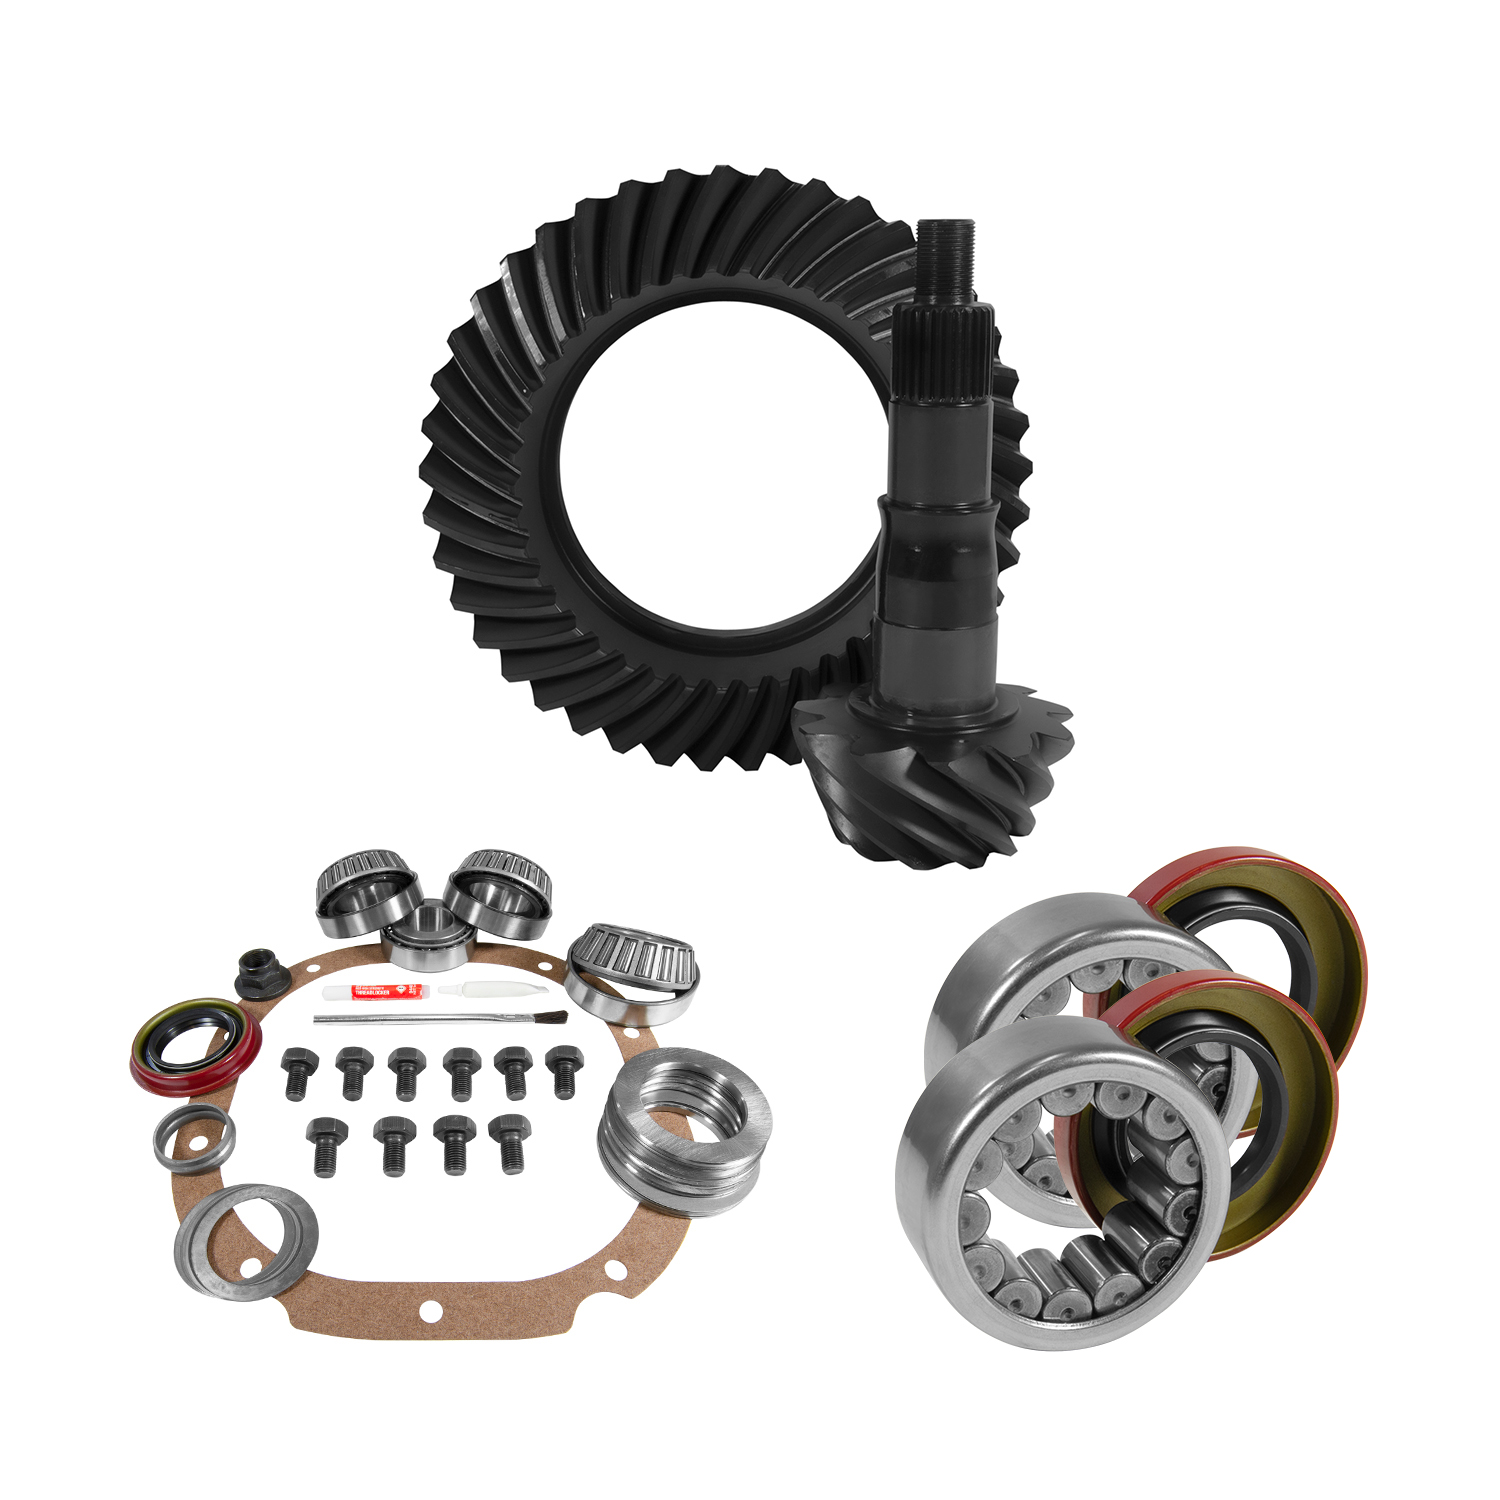 USA Standard 10770 8.8 in. Ford 4.88 Rear Ring & Pinion Install Kit, 2.99 in. Od Axle Bearings & Seals